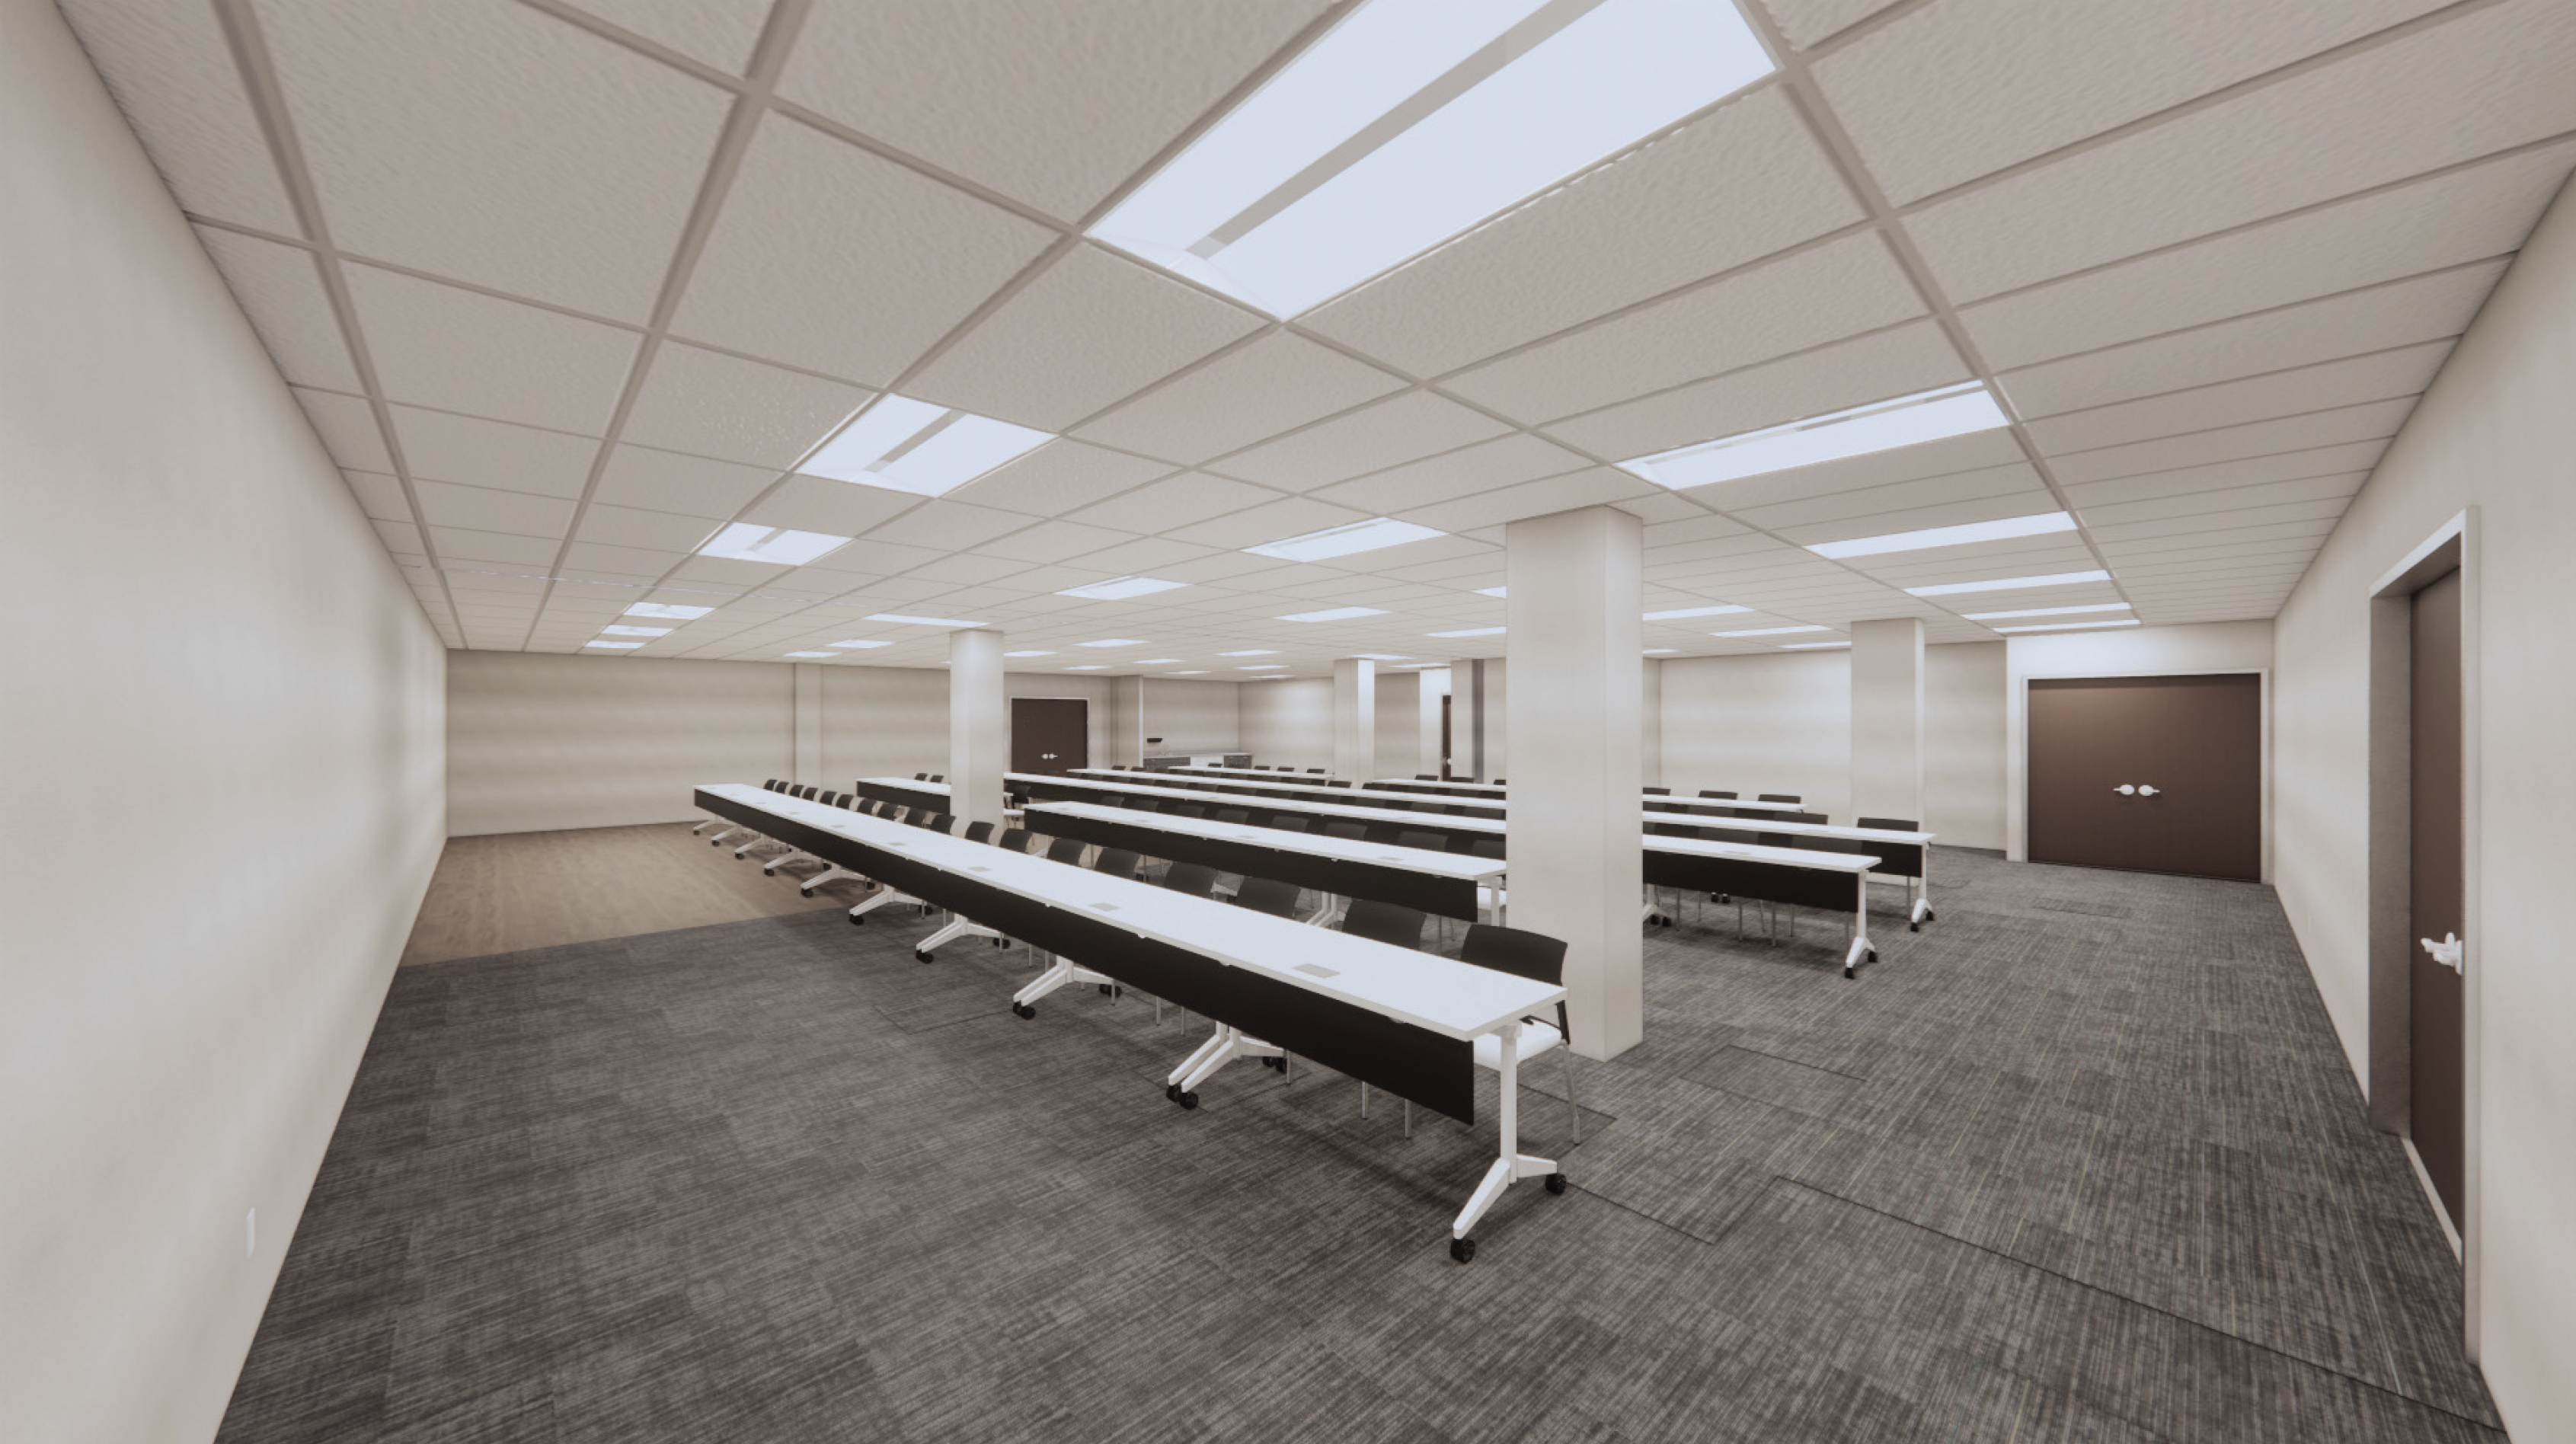 Rendering of the Community Room Renovation